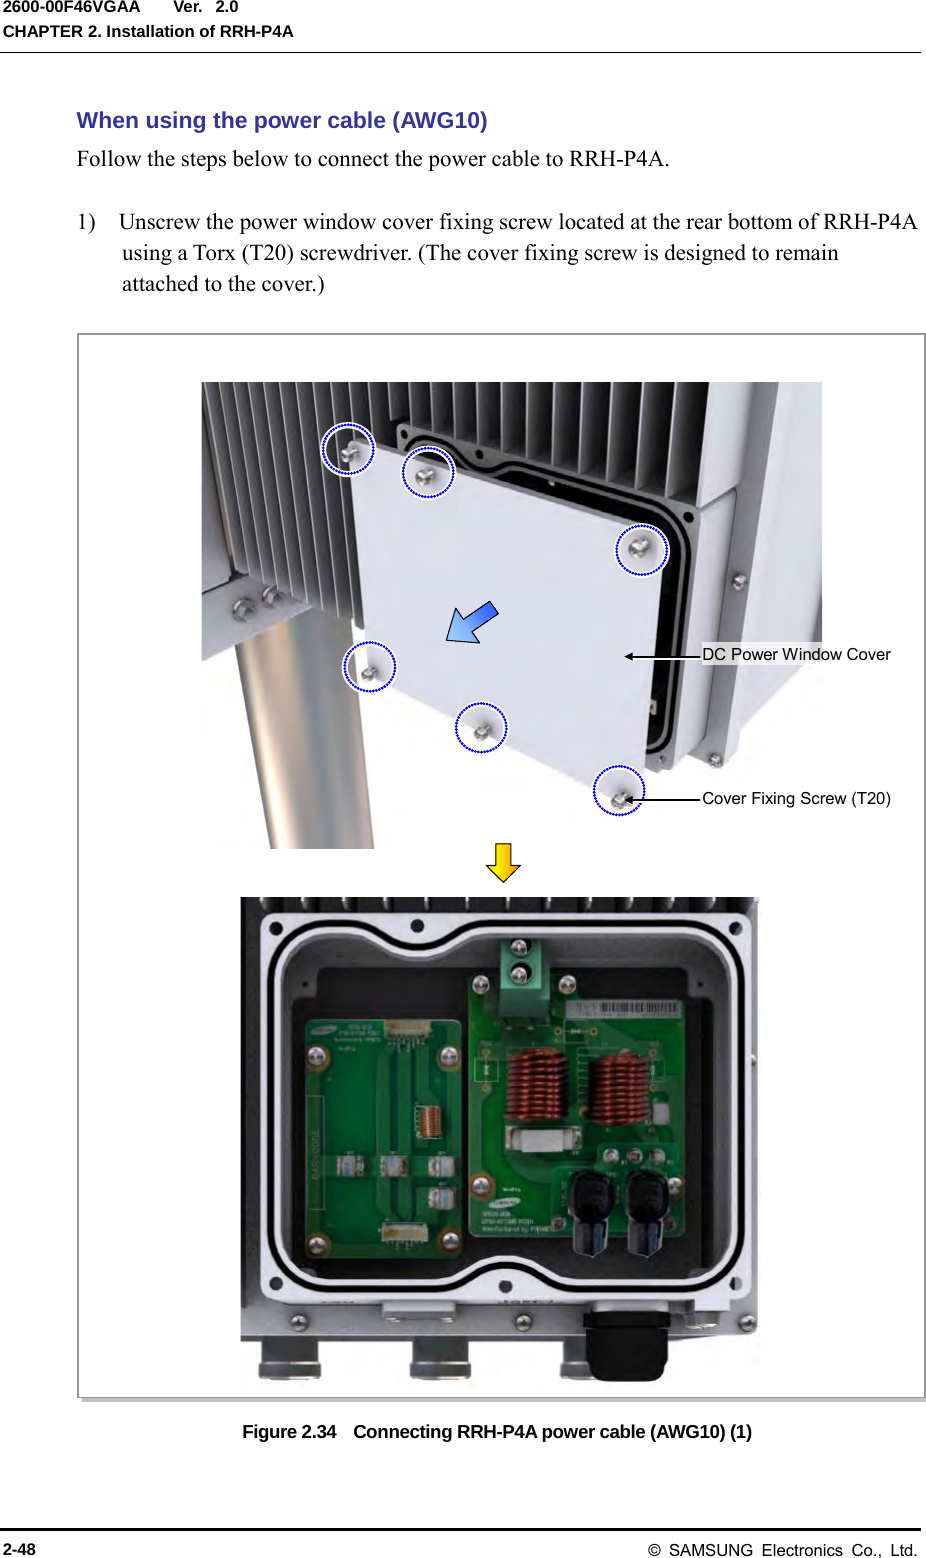  Ver.  CHAPTER 2. Installation of RRH-P4A 2600-00F46VGAA 2.0 When using the power cable (AWG10) Follow the steps below to connect the power cable to RRH-P4A.  1)    Unscrew the power window cover fixing screw located at the rear bottom of RRH-P4A using a Torx (T20) screwdriver. (The cover fixing screw is designed to remain attached to the cover.)  Figure 2.34    Connecting RRH-P4A power cable (AWG10) (1) Cover Fixing Screw (T20) DC Power Window Cover 2-48 © SAMSUNG Electronics Co., Ltd. 